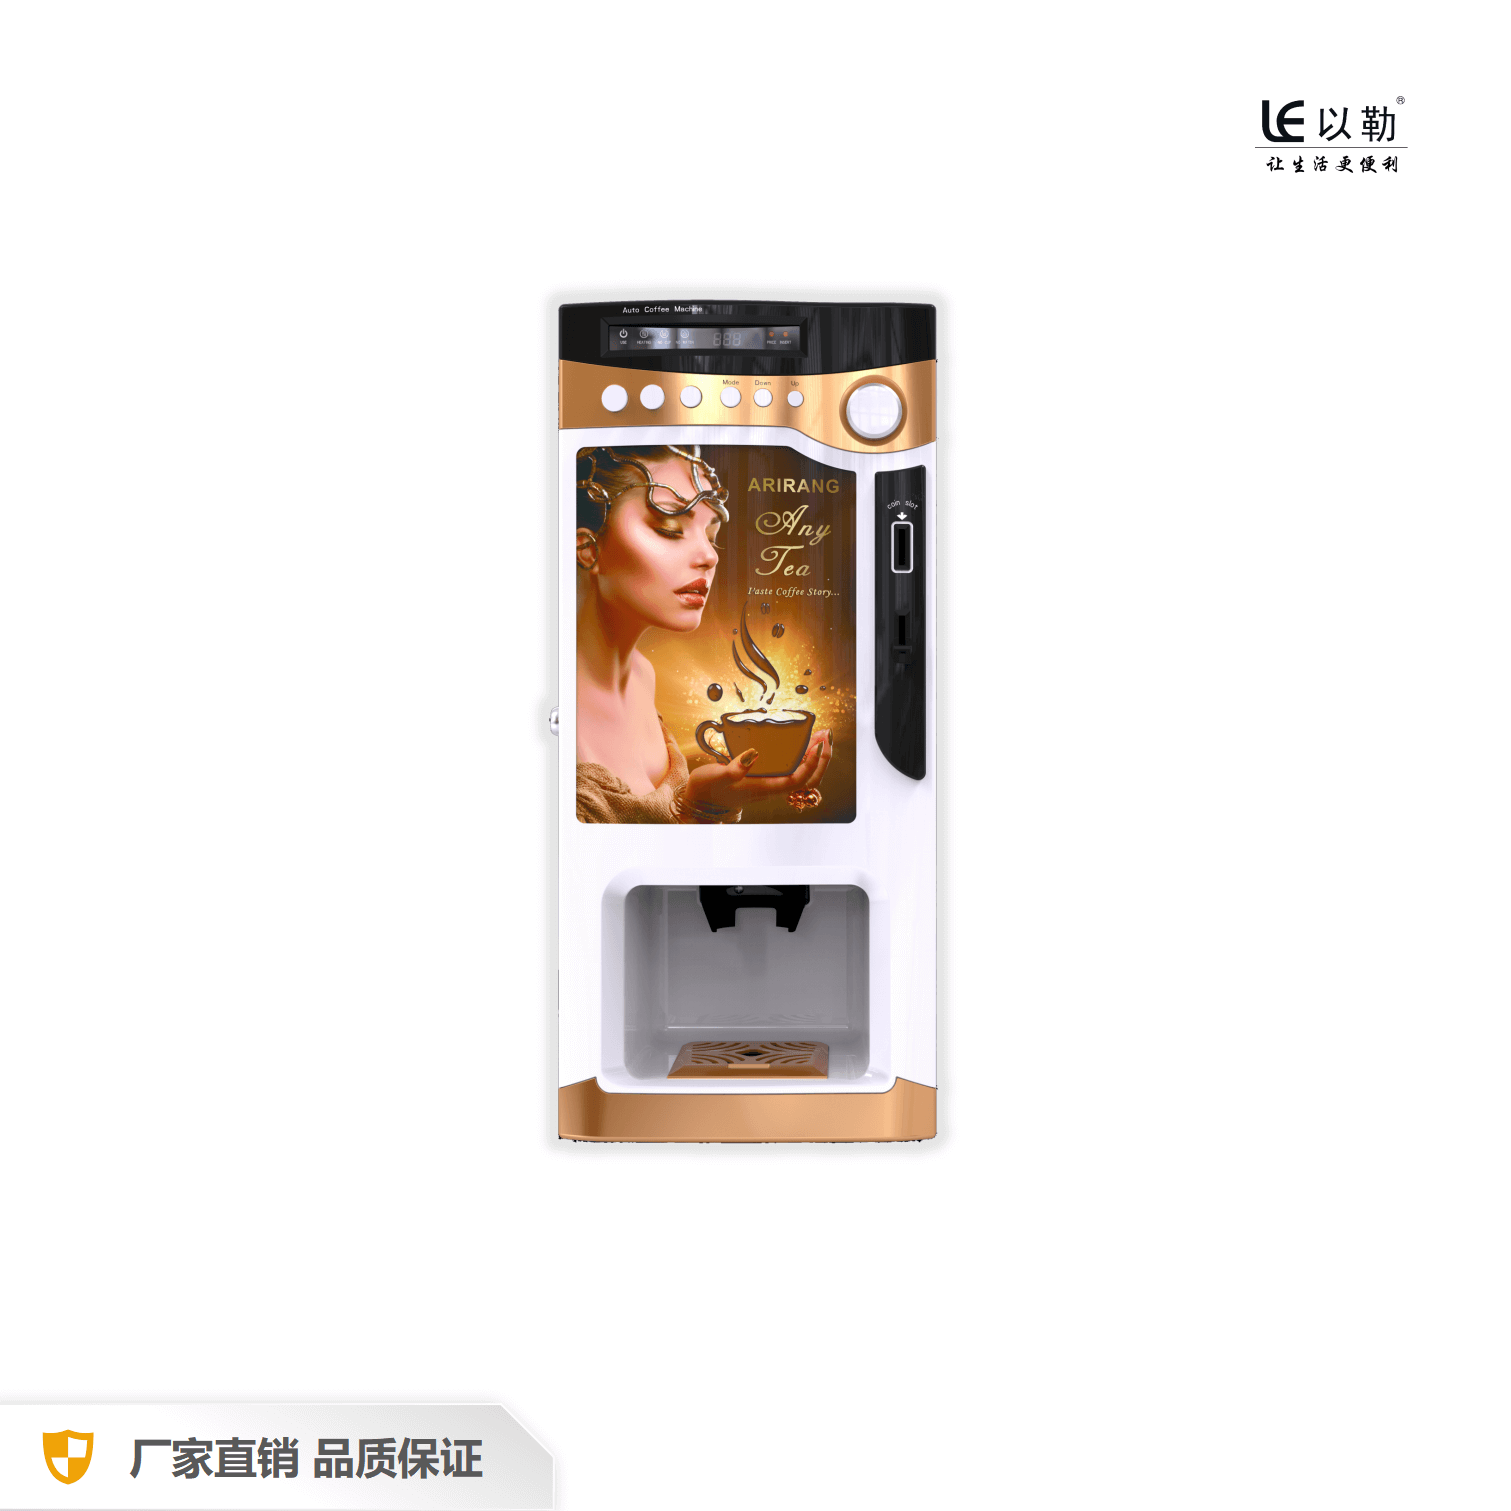 Coin Operated Instant Coffee Vending Machine With Cup Dispenser 